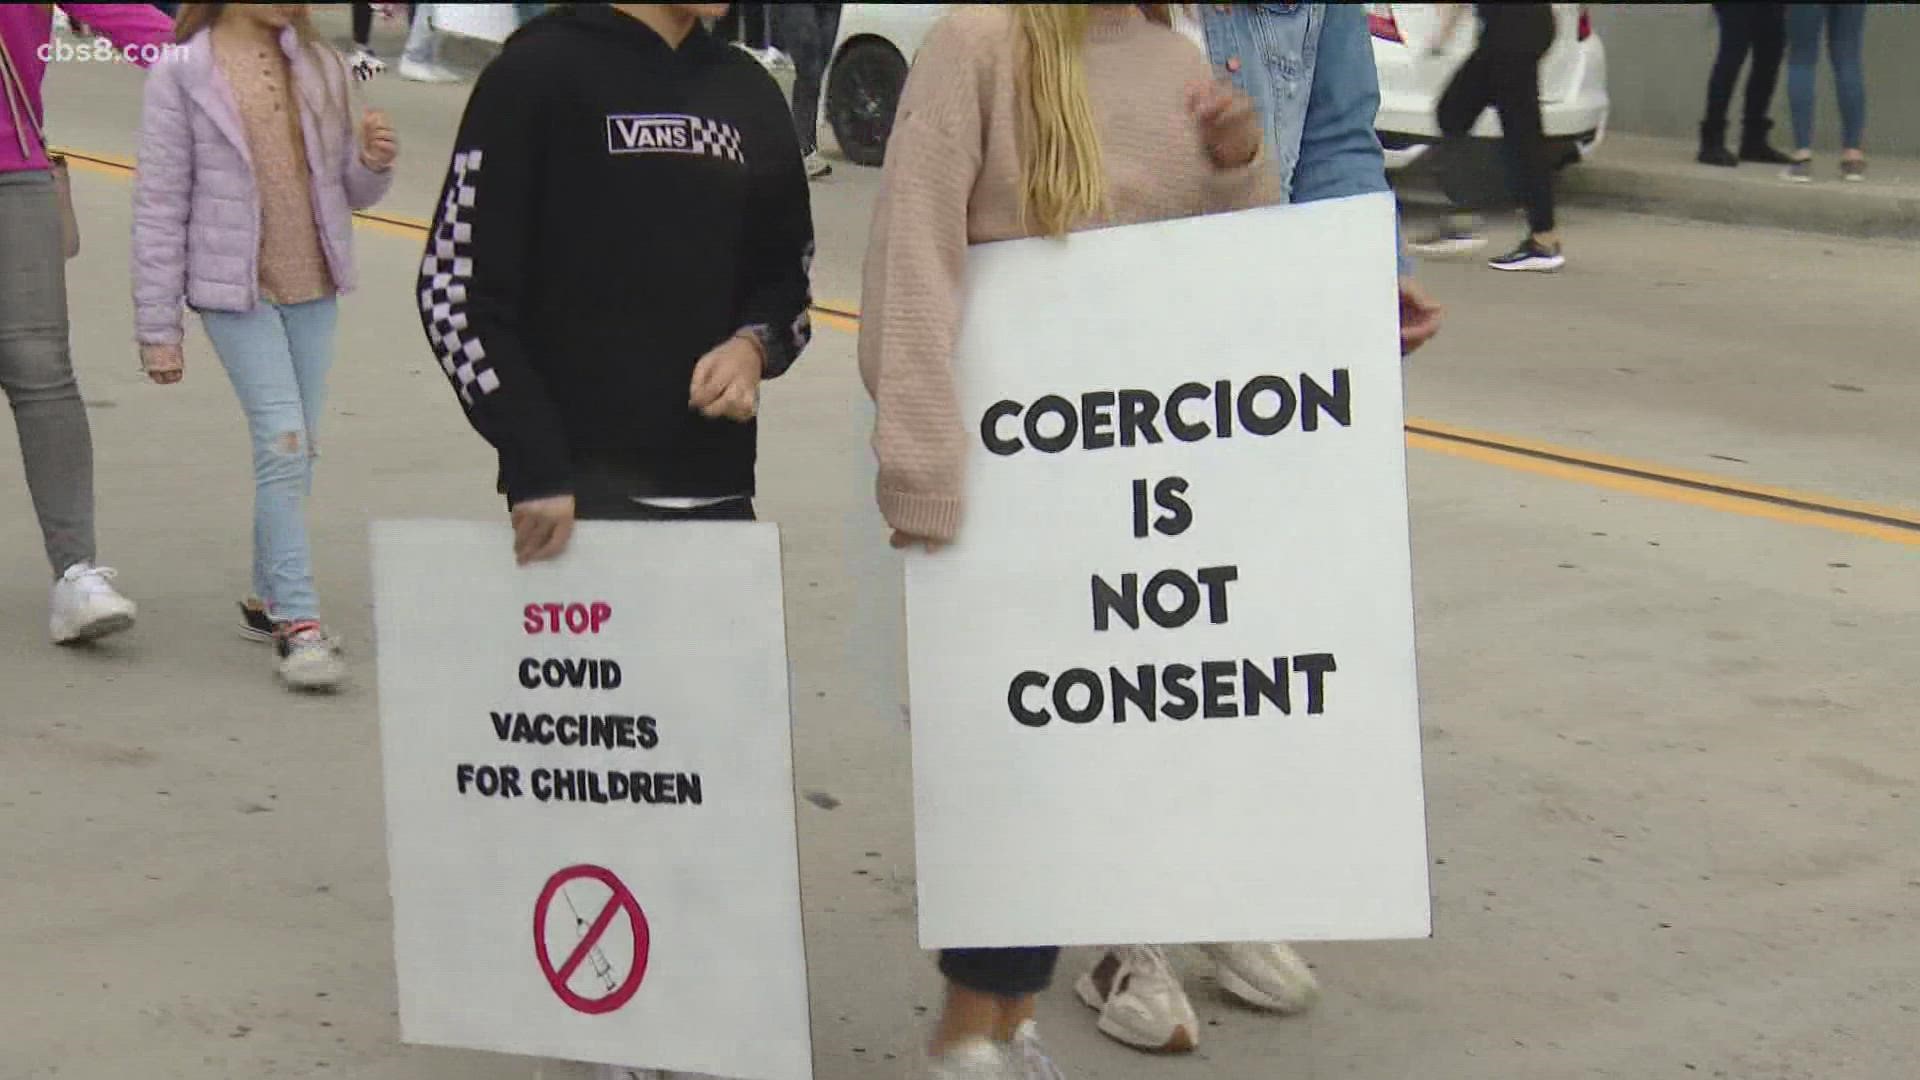 On Monday, October 18th some California parents kept their kids home from school to stand up for freedom of choice against mandates.